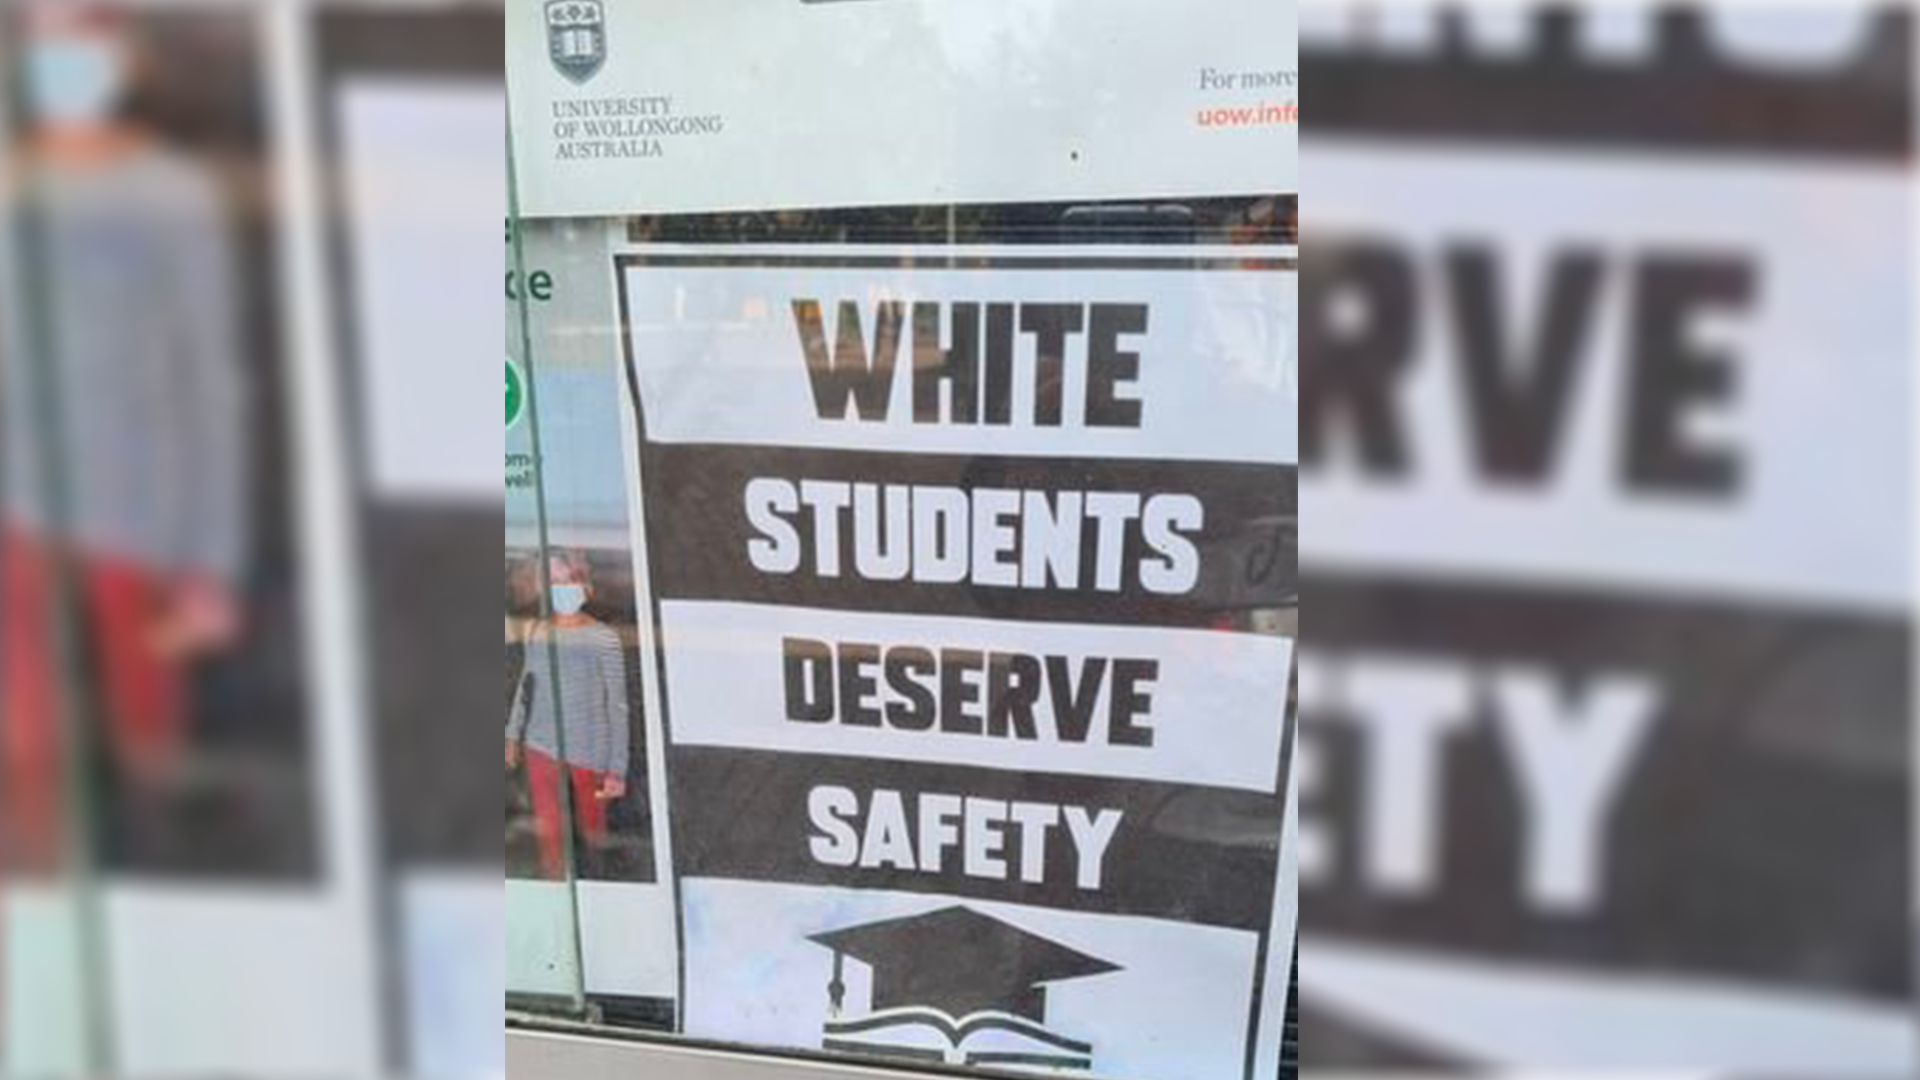 Campus nazi poster referred to police